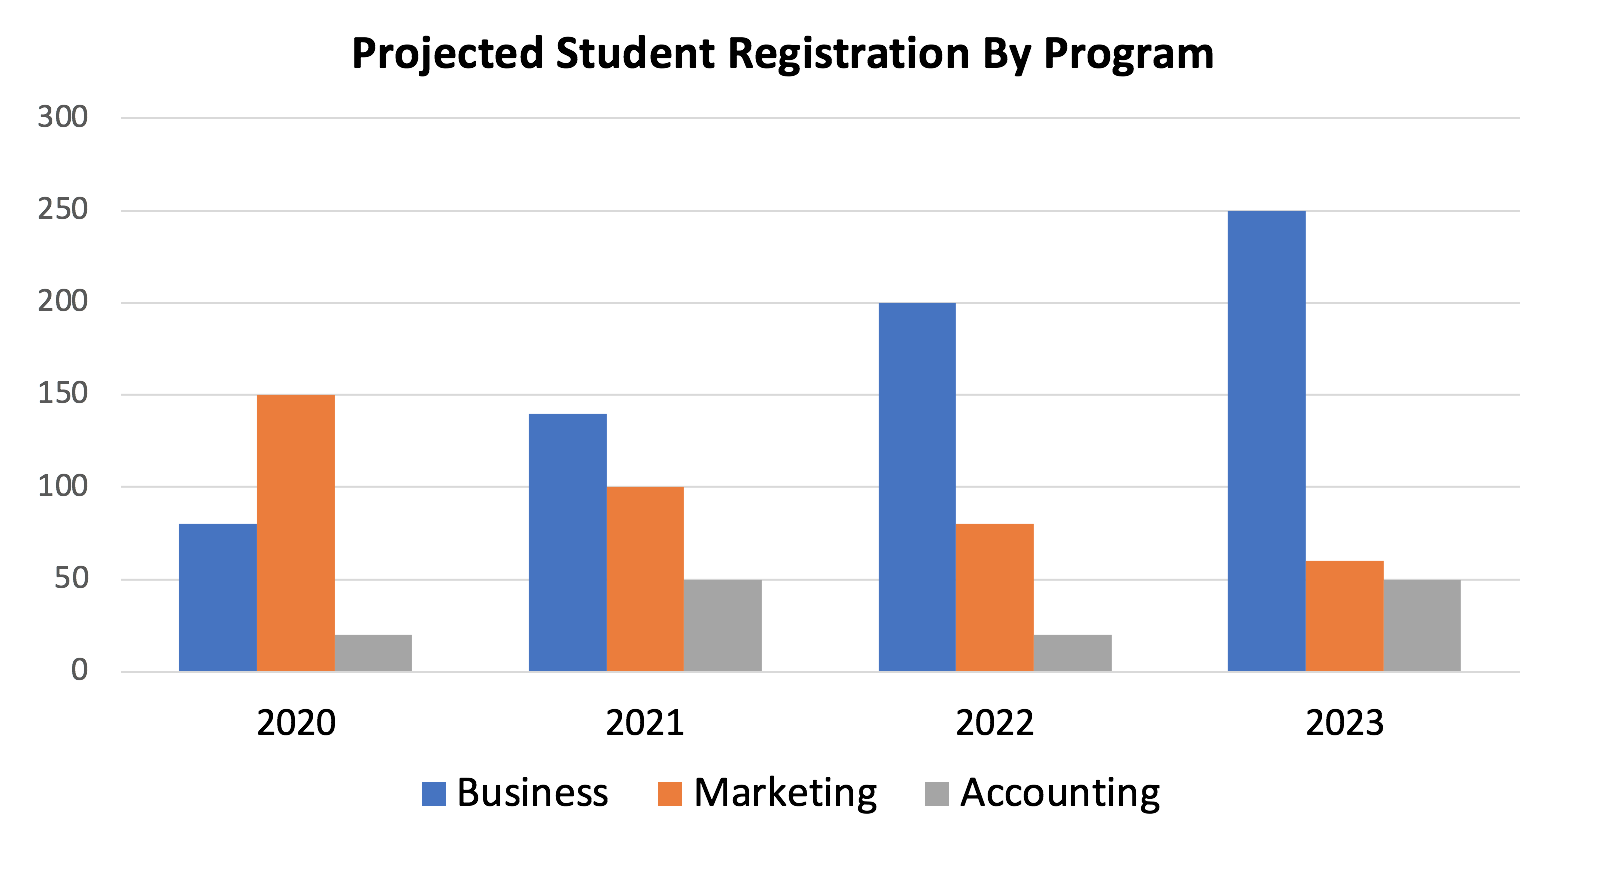 bar chart showing different registrations by program over a number of years